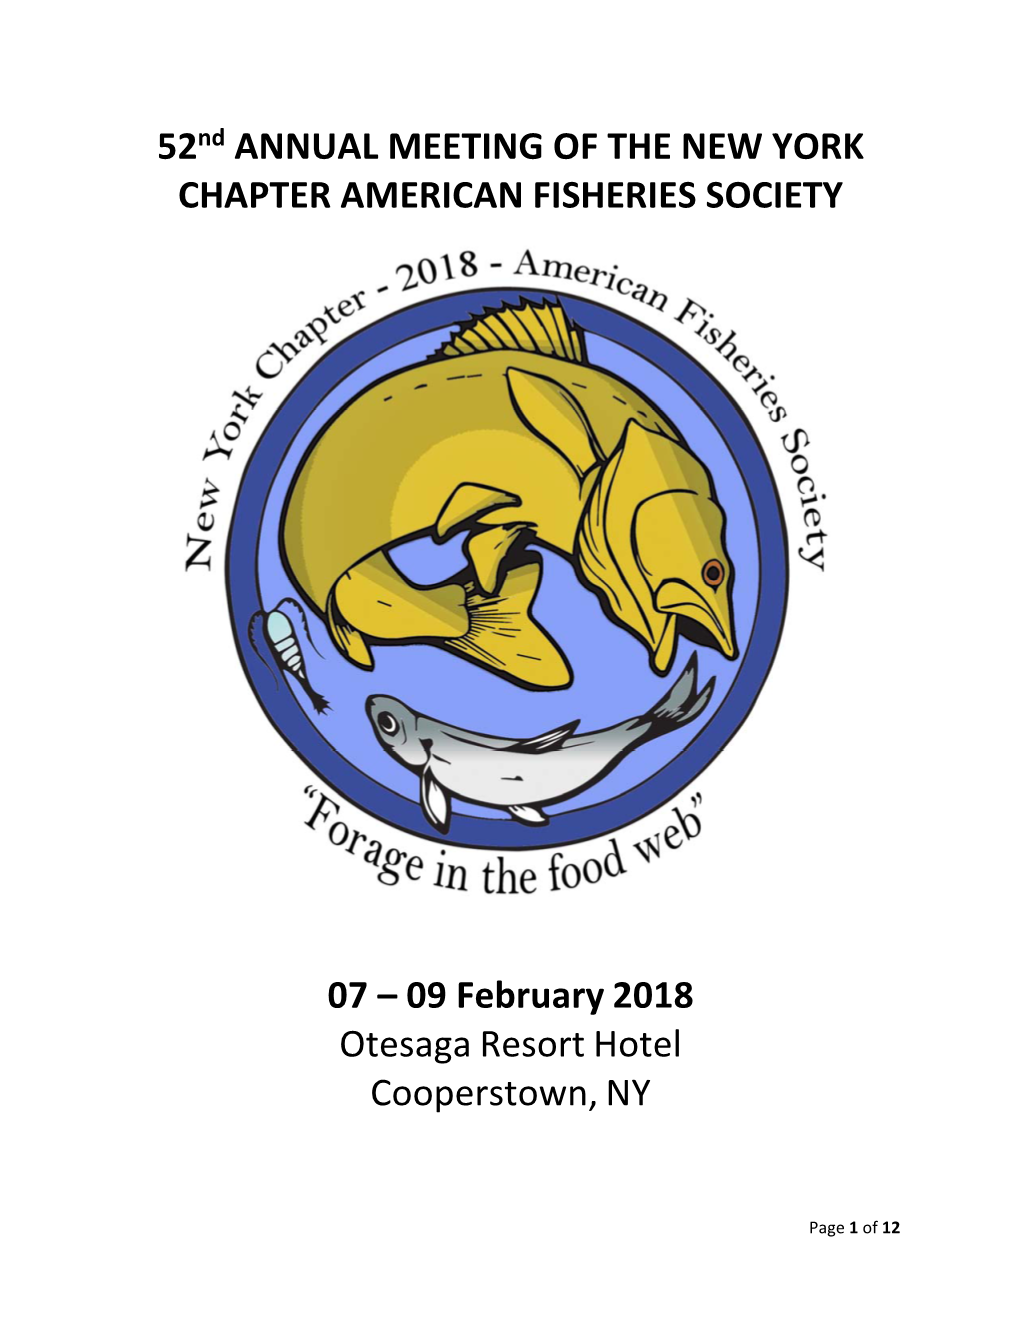 52Nd ANNUAL MEETING of the NEW YORK CHAPTER AMERICAN FISHERIES SOCIETY